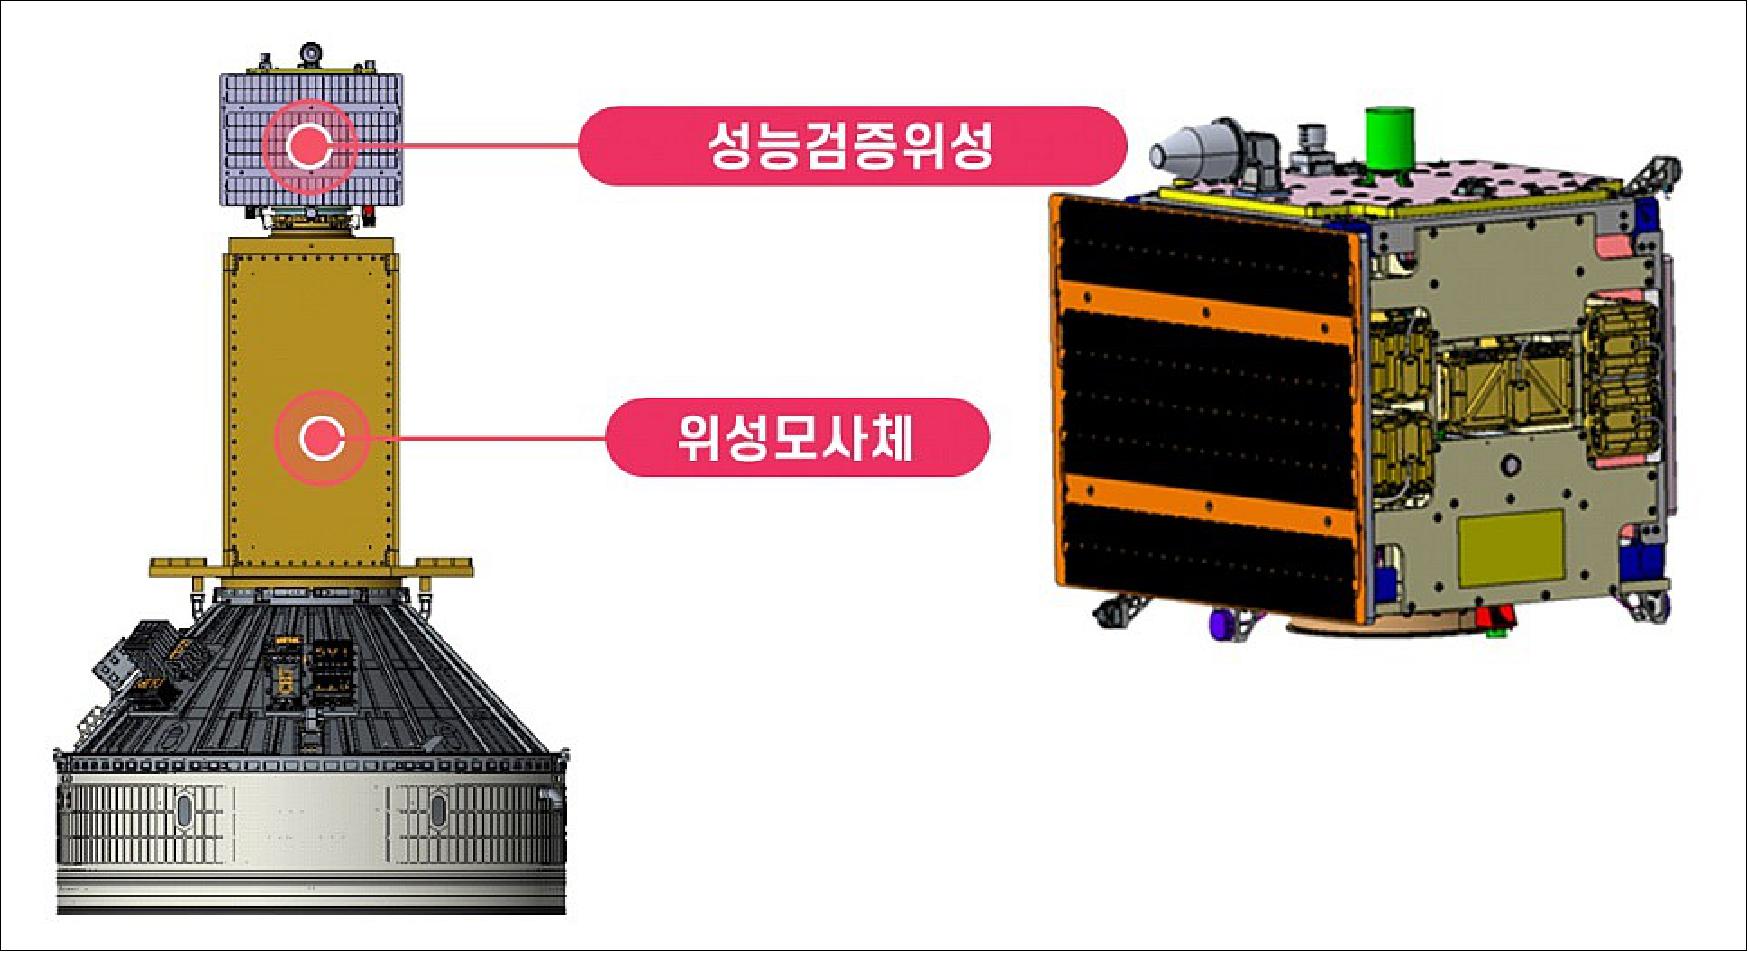 Figure 2: Models of the PVSAT (right) and mass simulator (left, with PVSAT mounted on top). Notice the five CubeSat bays on PVSAT (image credit: KARI)